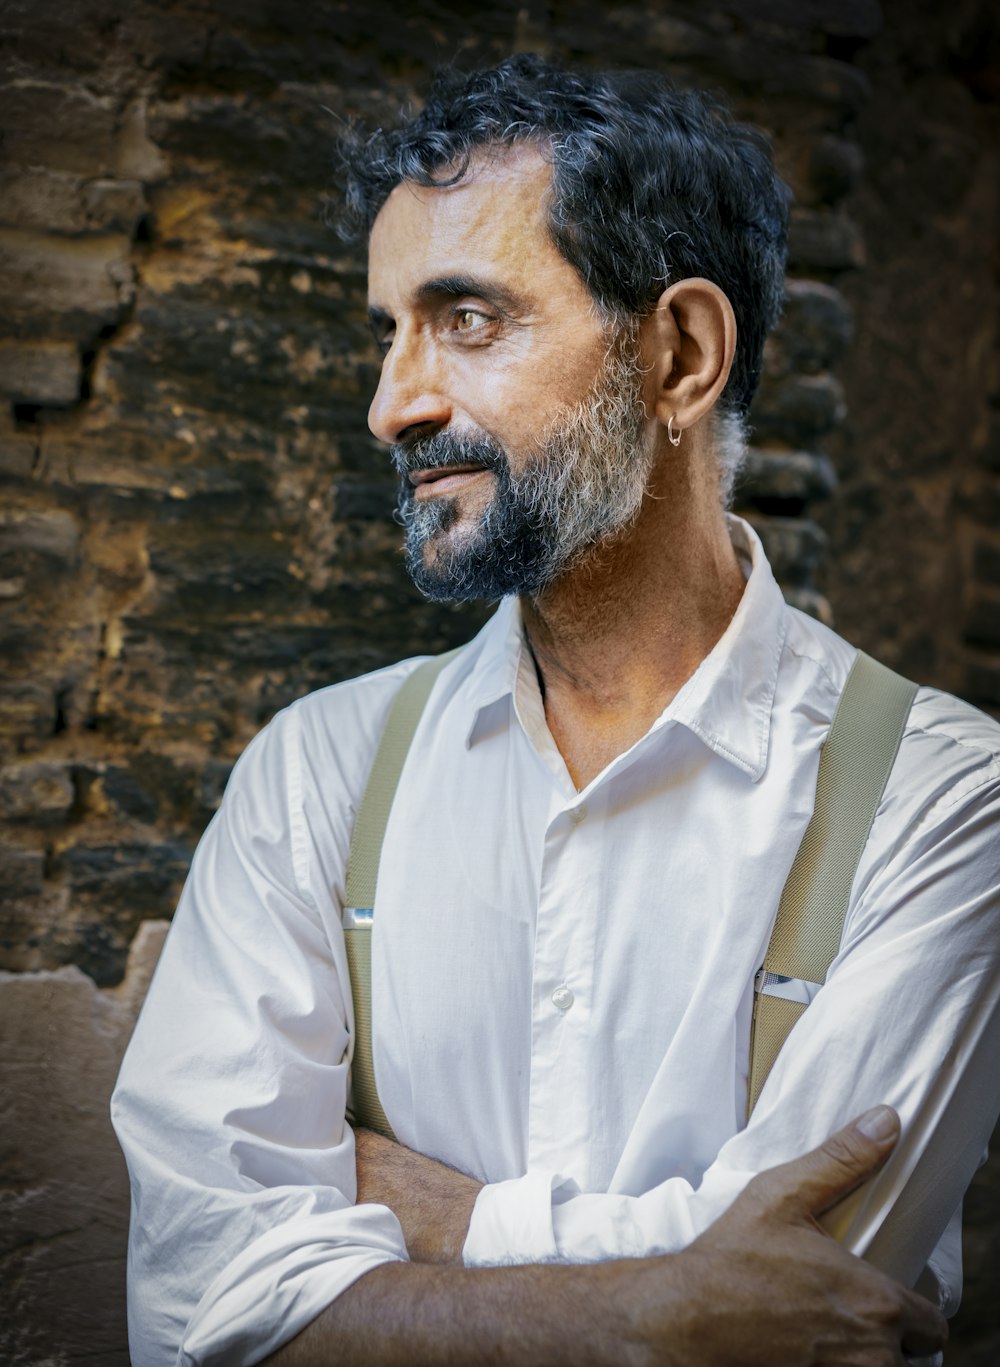 a man wearing suspenders and a white shirt